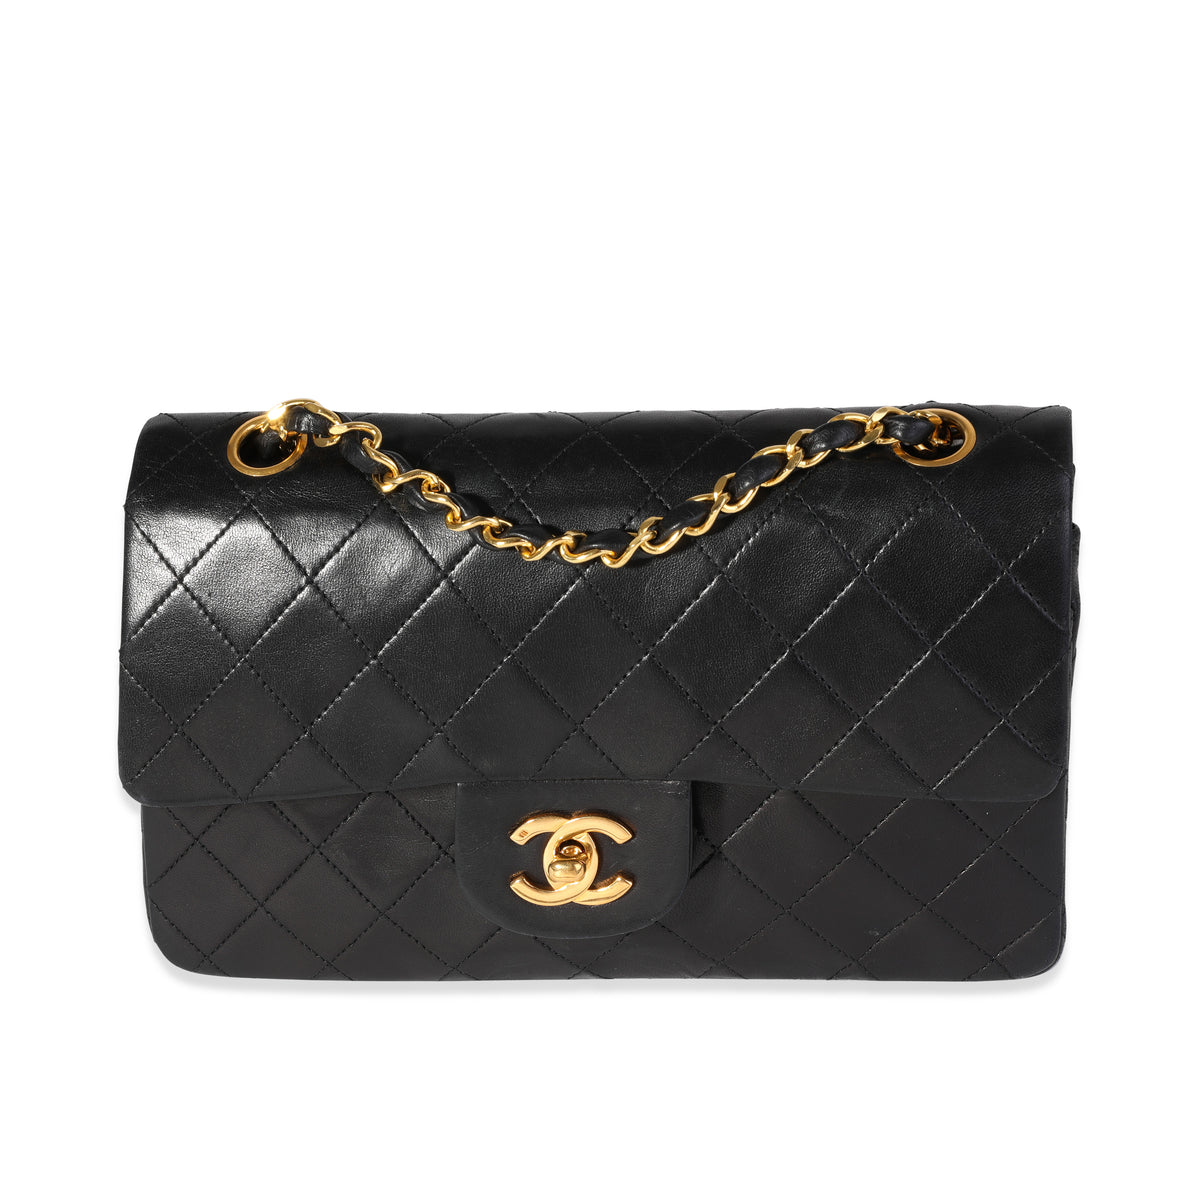 Chanel Small Classic Double Flap Bag A01113 Black Leather Lambskin